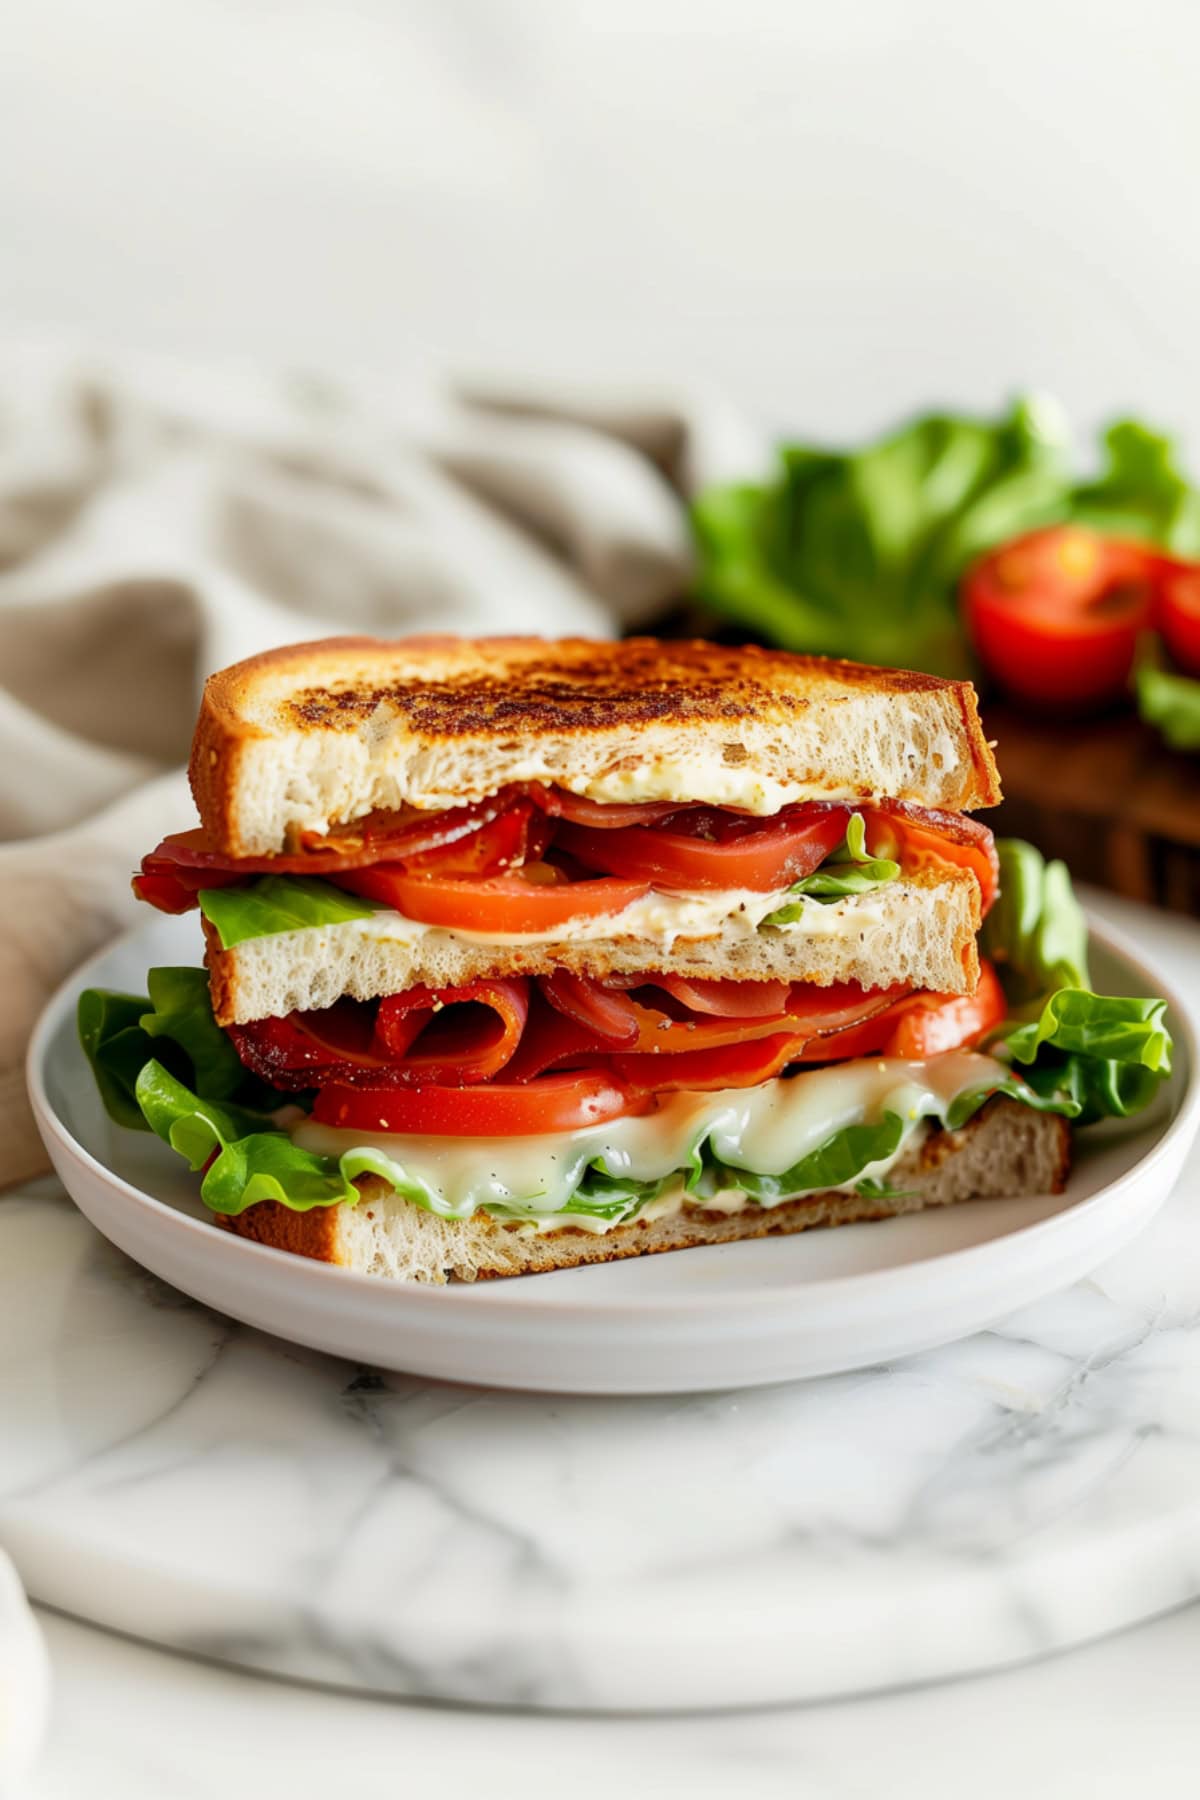 Savory BLT sandwich, served on whole grain bread with a creamy mayo spread.